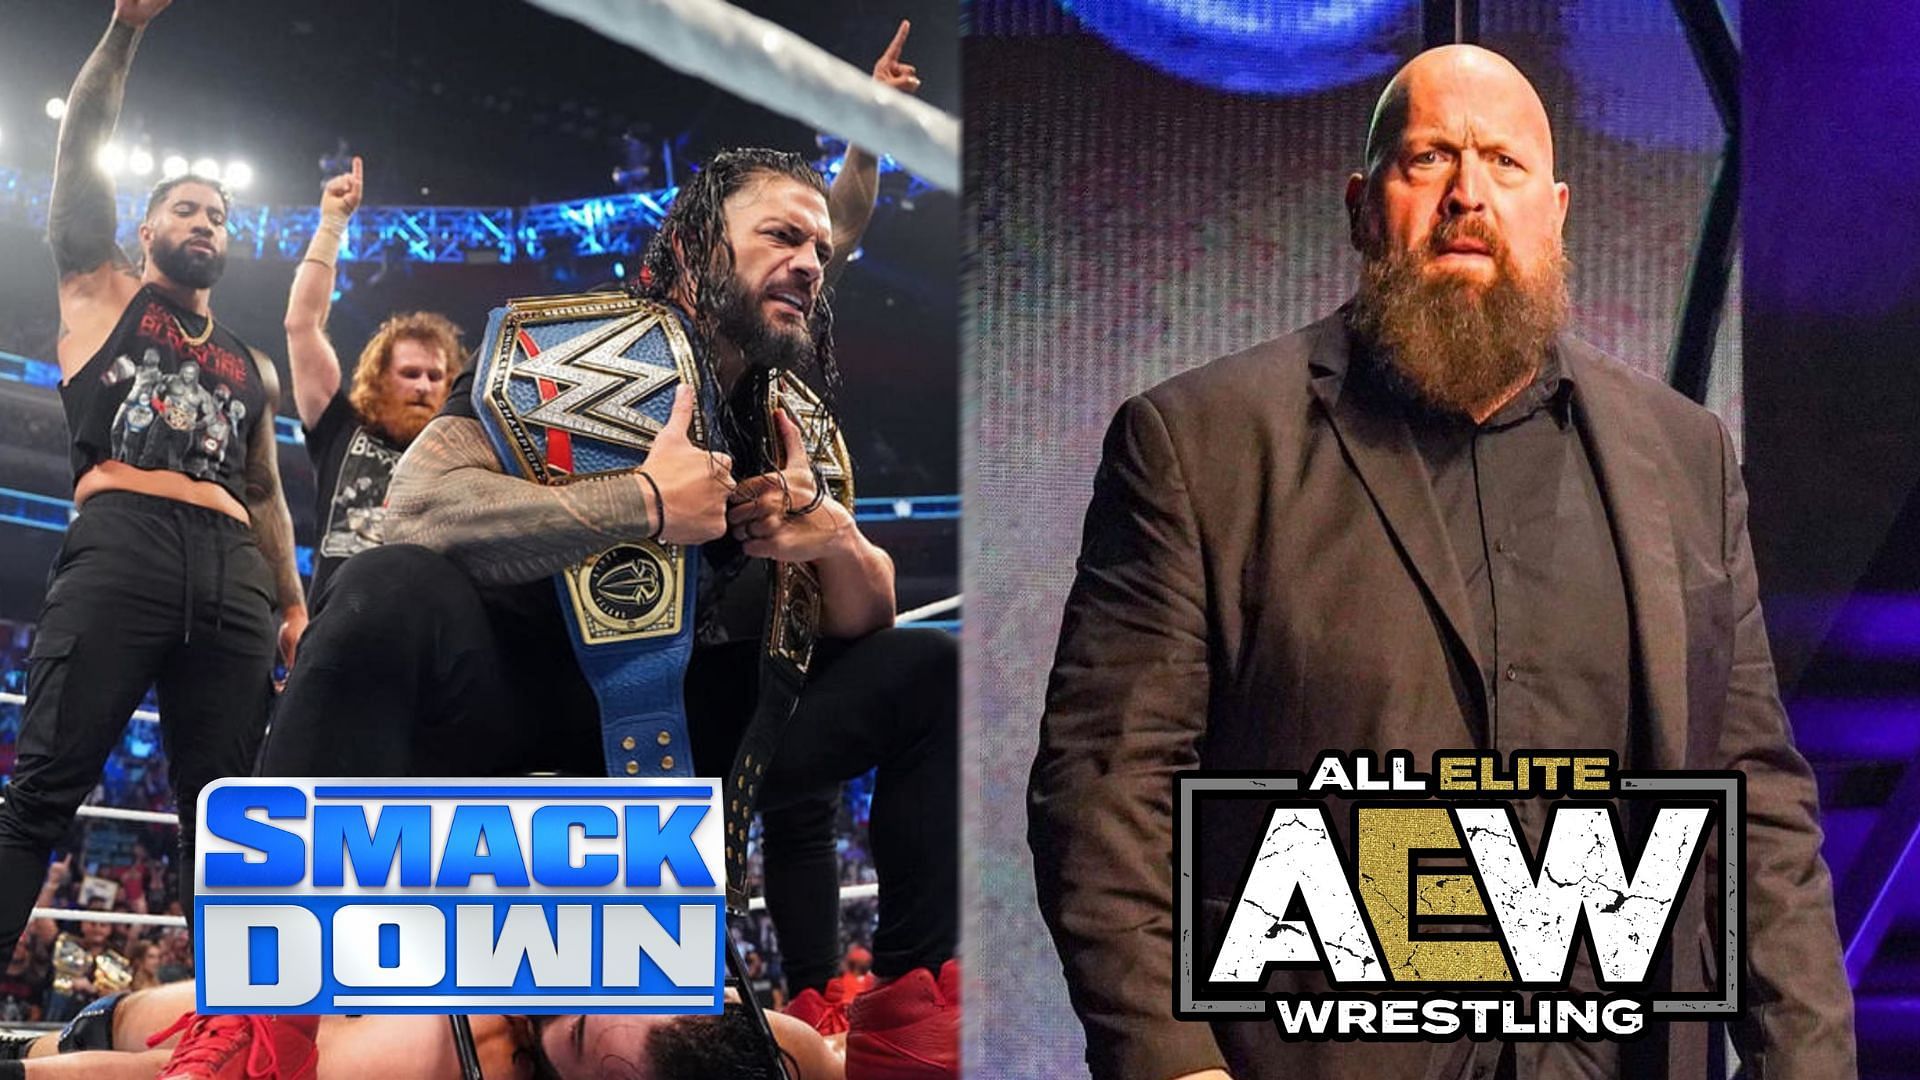 How did The Bloodline cross over into AEW this week and who did Paul Wight aggravate?